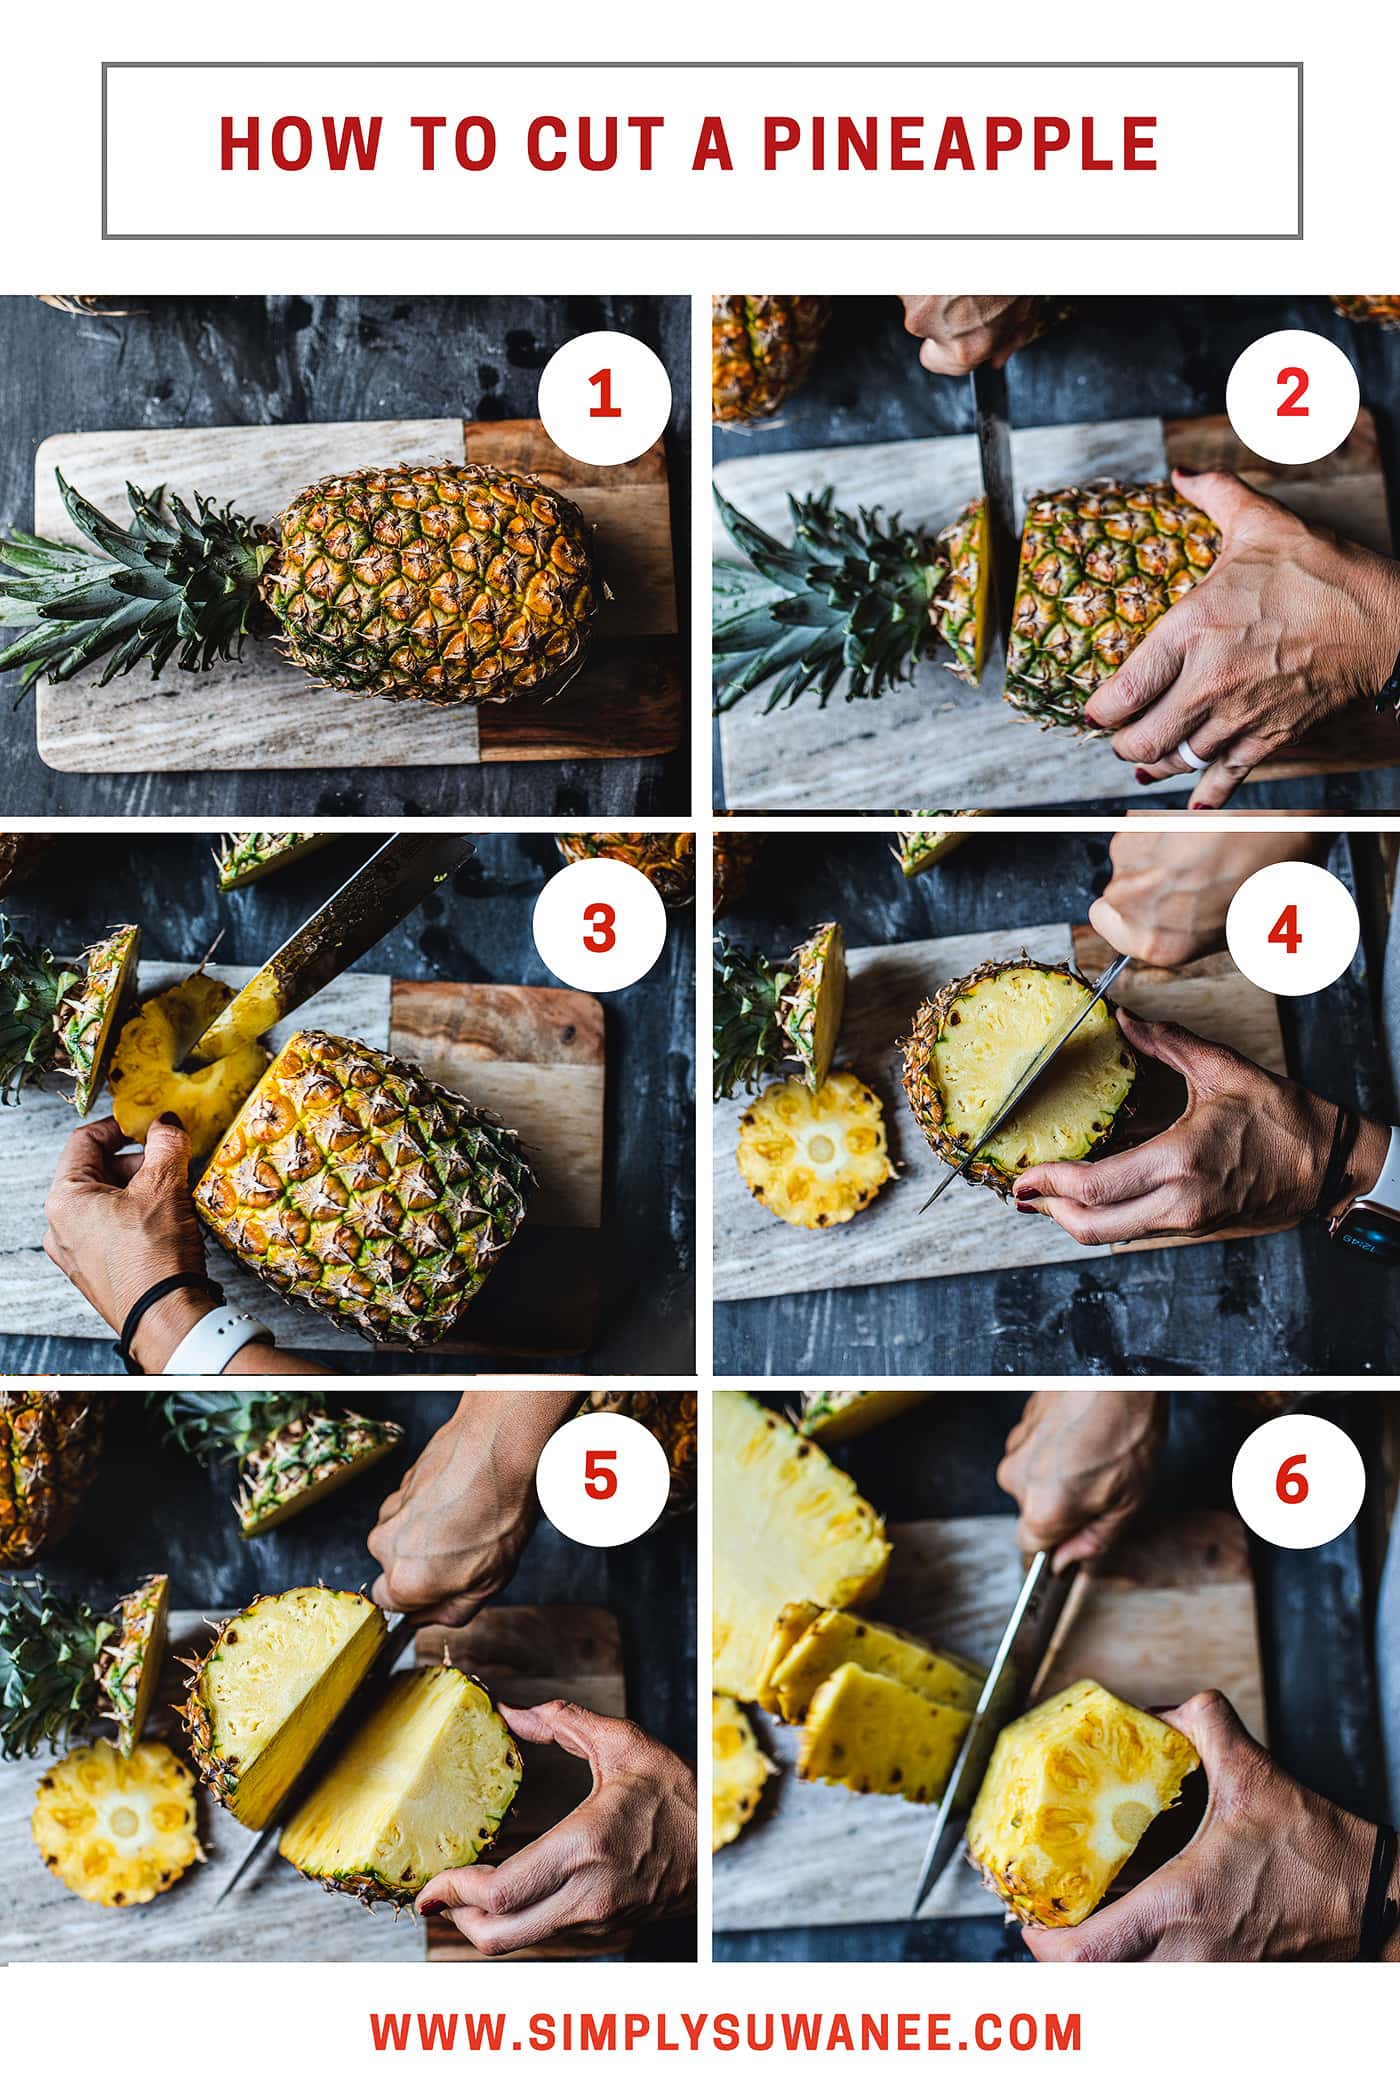 Do you love pineapples but have always been intimidated by how to cut them? Today, I'm going to show you, step by step with helpful photo instructions, how to cut a pineapple, AND  how to to make a pineapple bowl! Get ready to be an expert at cutting your favorite fruit.  #pineapples #howtocutpineapple #cuttingpineapple #pineapplecutting 